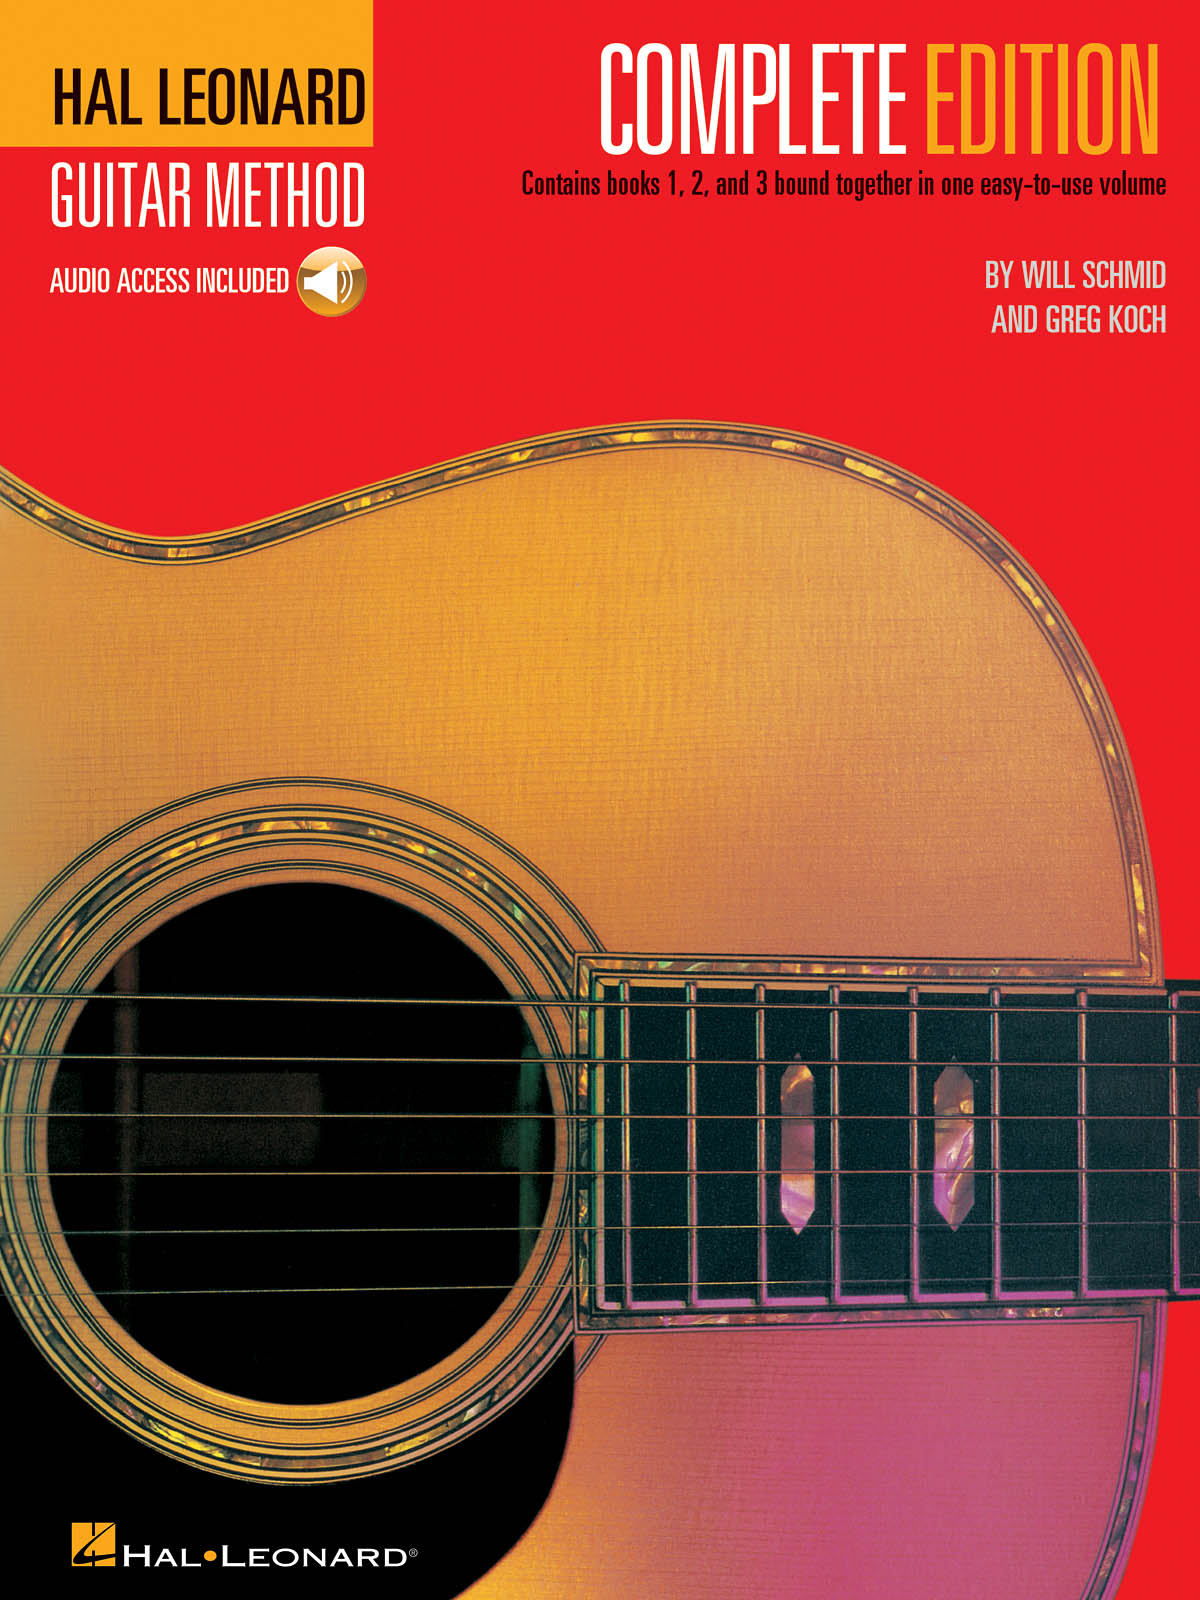 Cover of Hal Leonard Guitar Method, Second Edition - Complete Edition